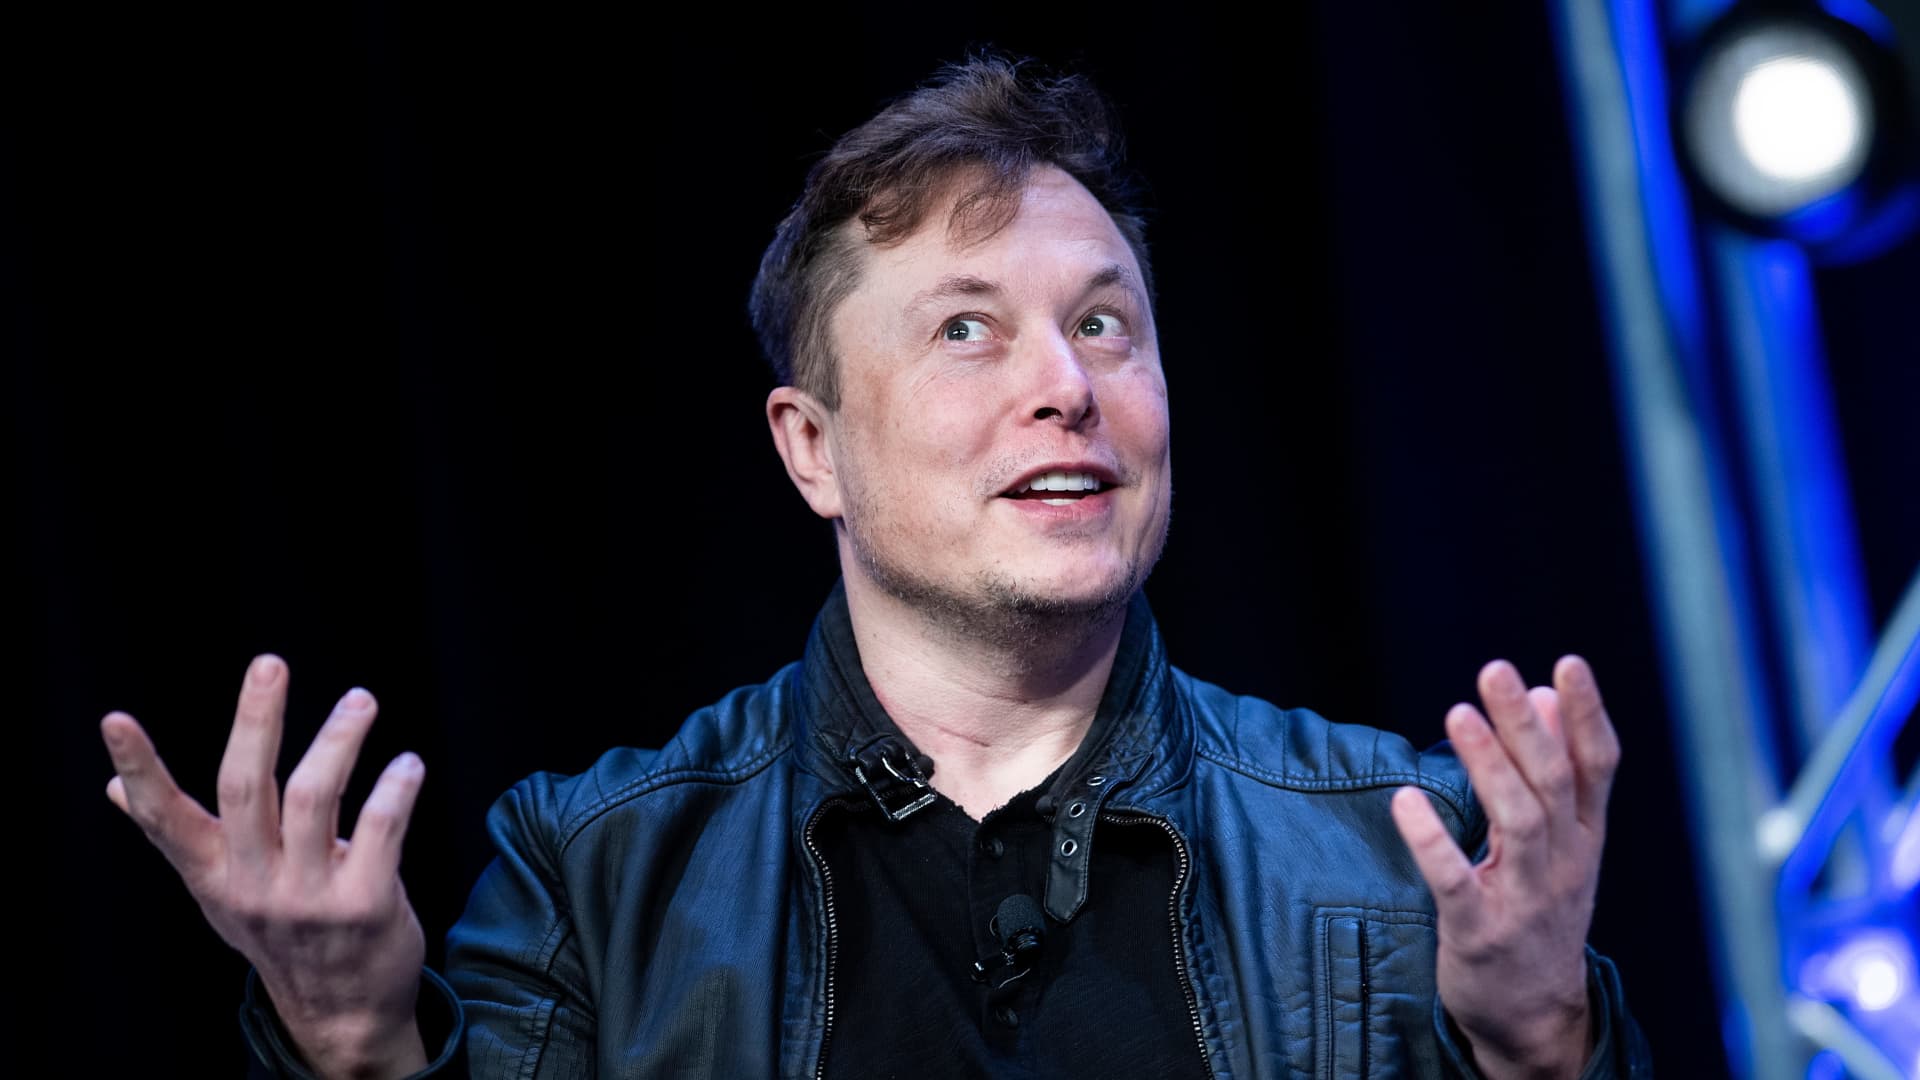 Faber: It seems unlikely anyone will bid against Musk to take Twitter private